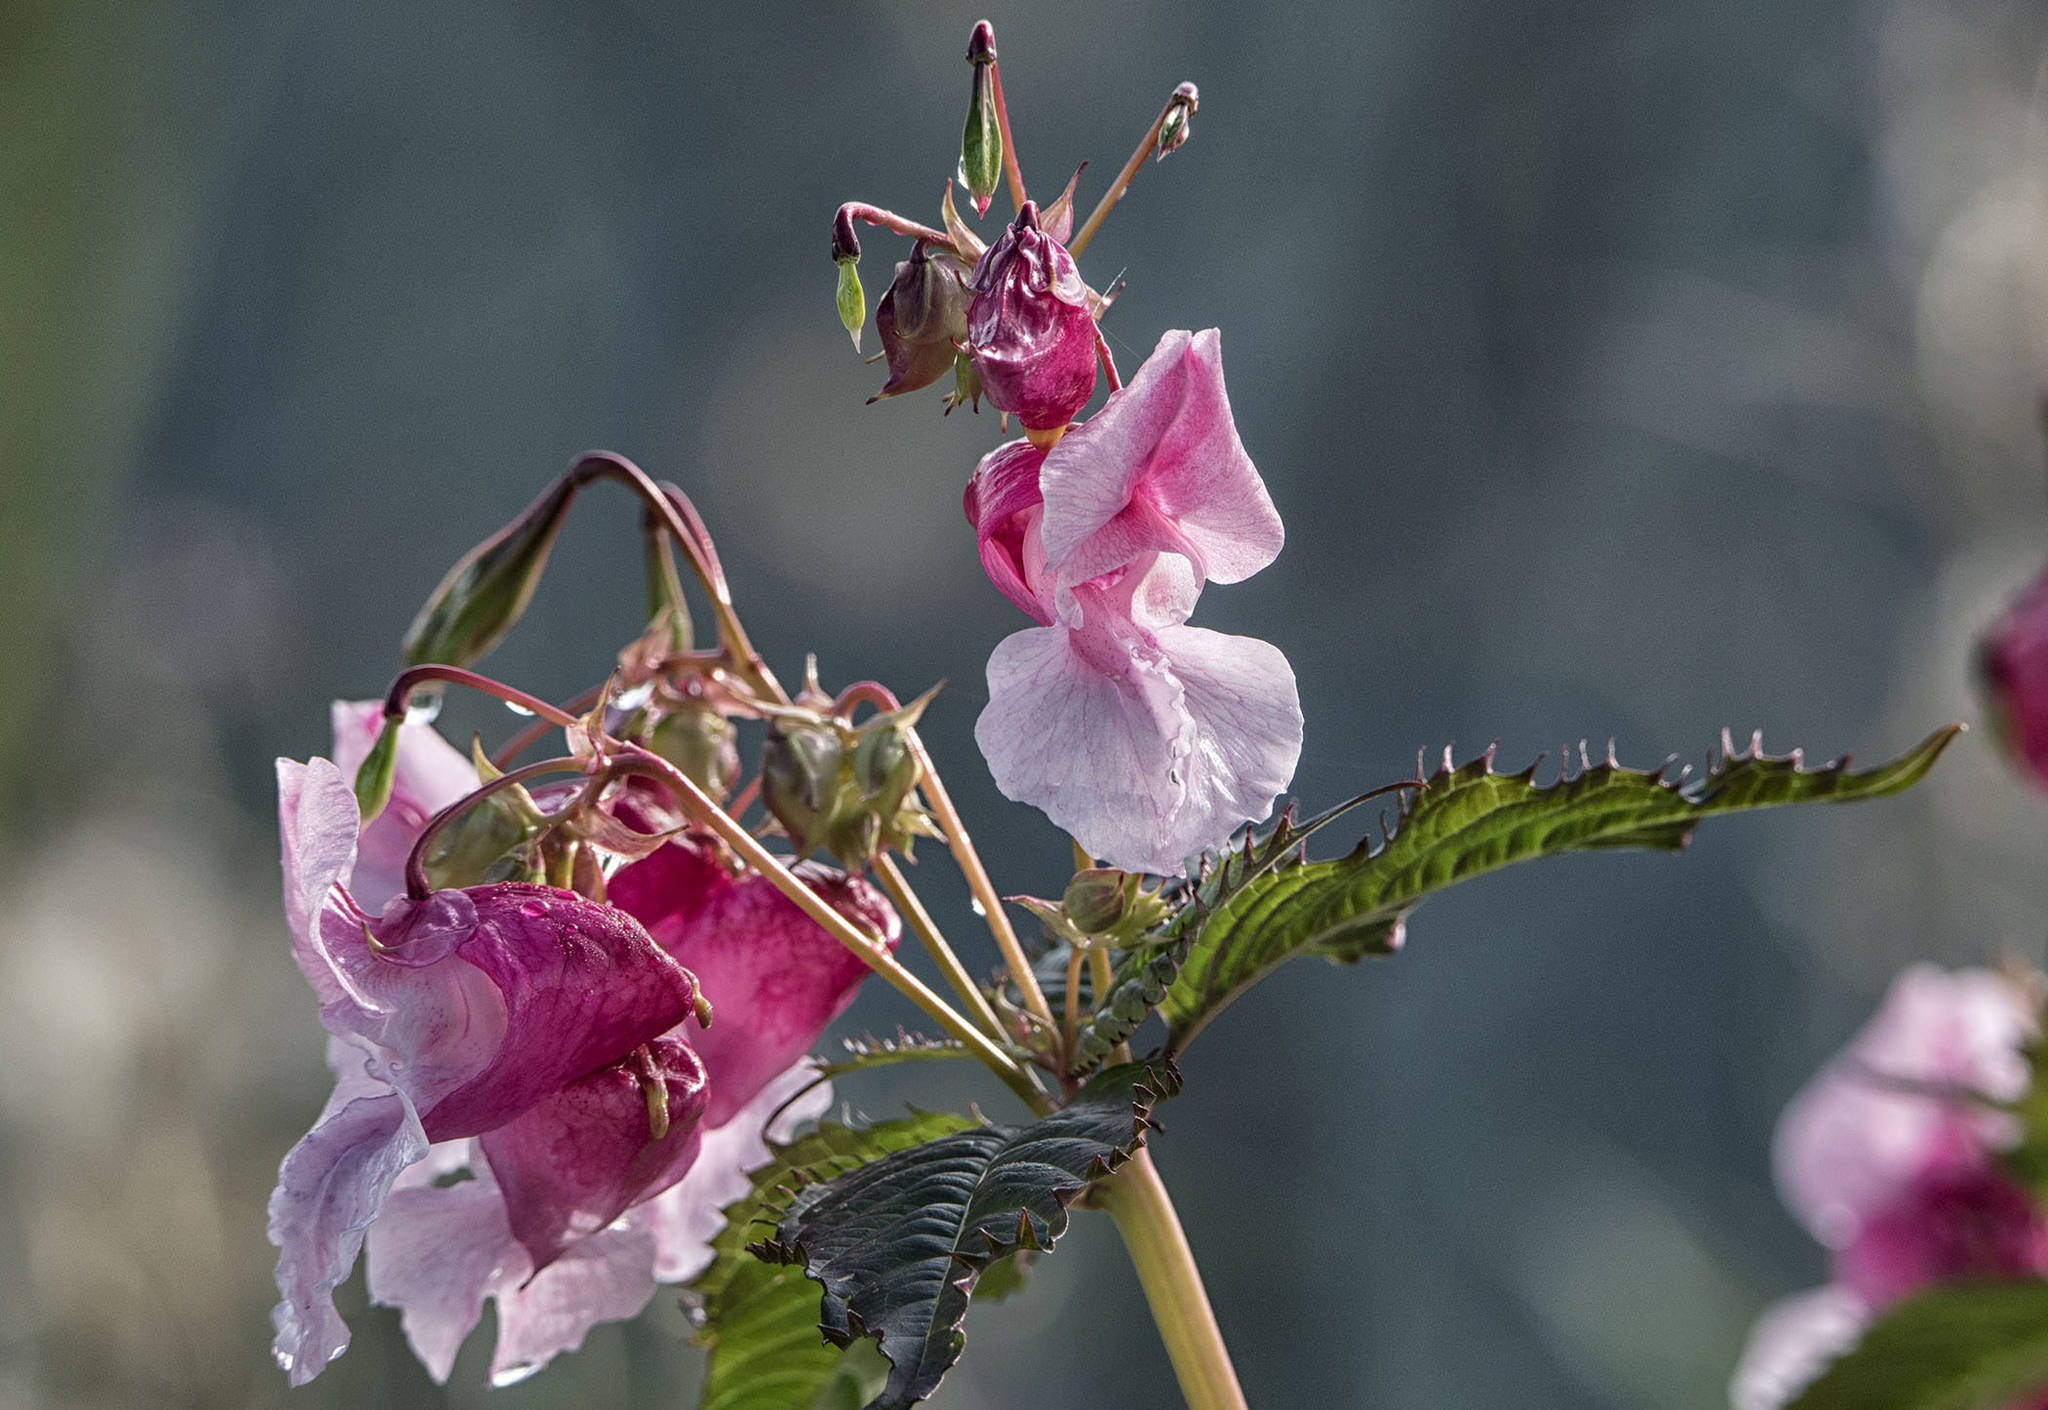 Himalayan Balsam, an invasive species, is seen edge of the Mendenhall Wetlands on Friday, Sept. 25, 2020. (Coutesy Photo / Kenneth Gill, gillfoto)